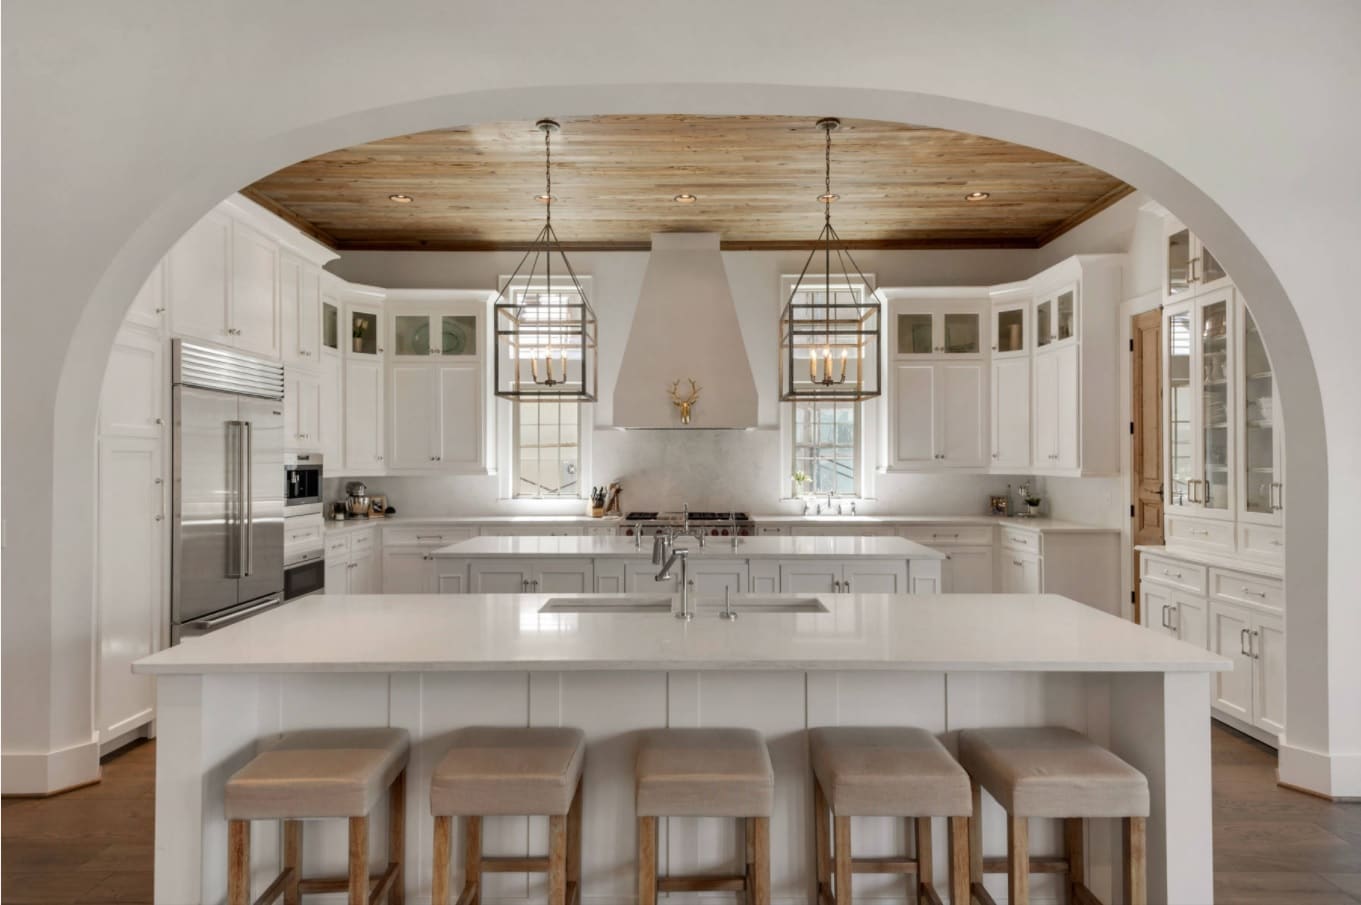 Top 15 Best Wooden Ceiling Design Ideas. Modern interpretation of French Classic in the white colored kitchen